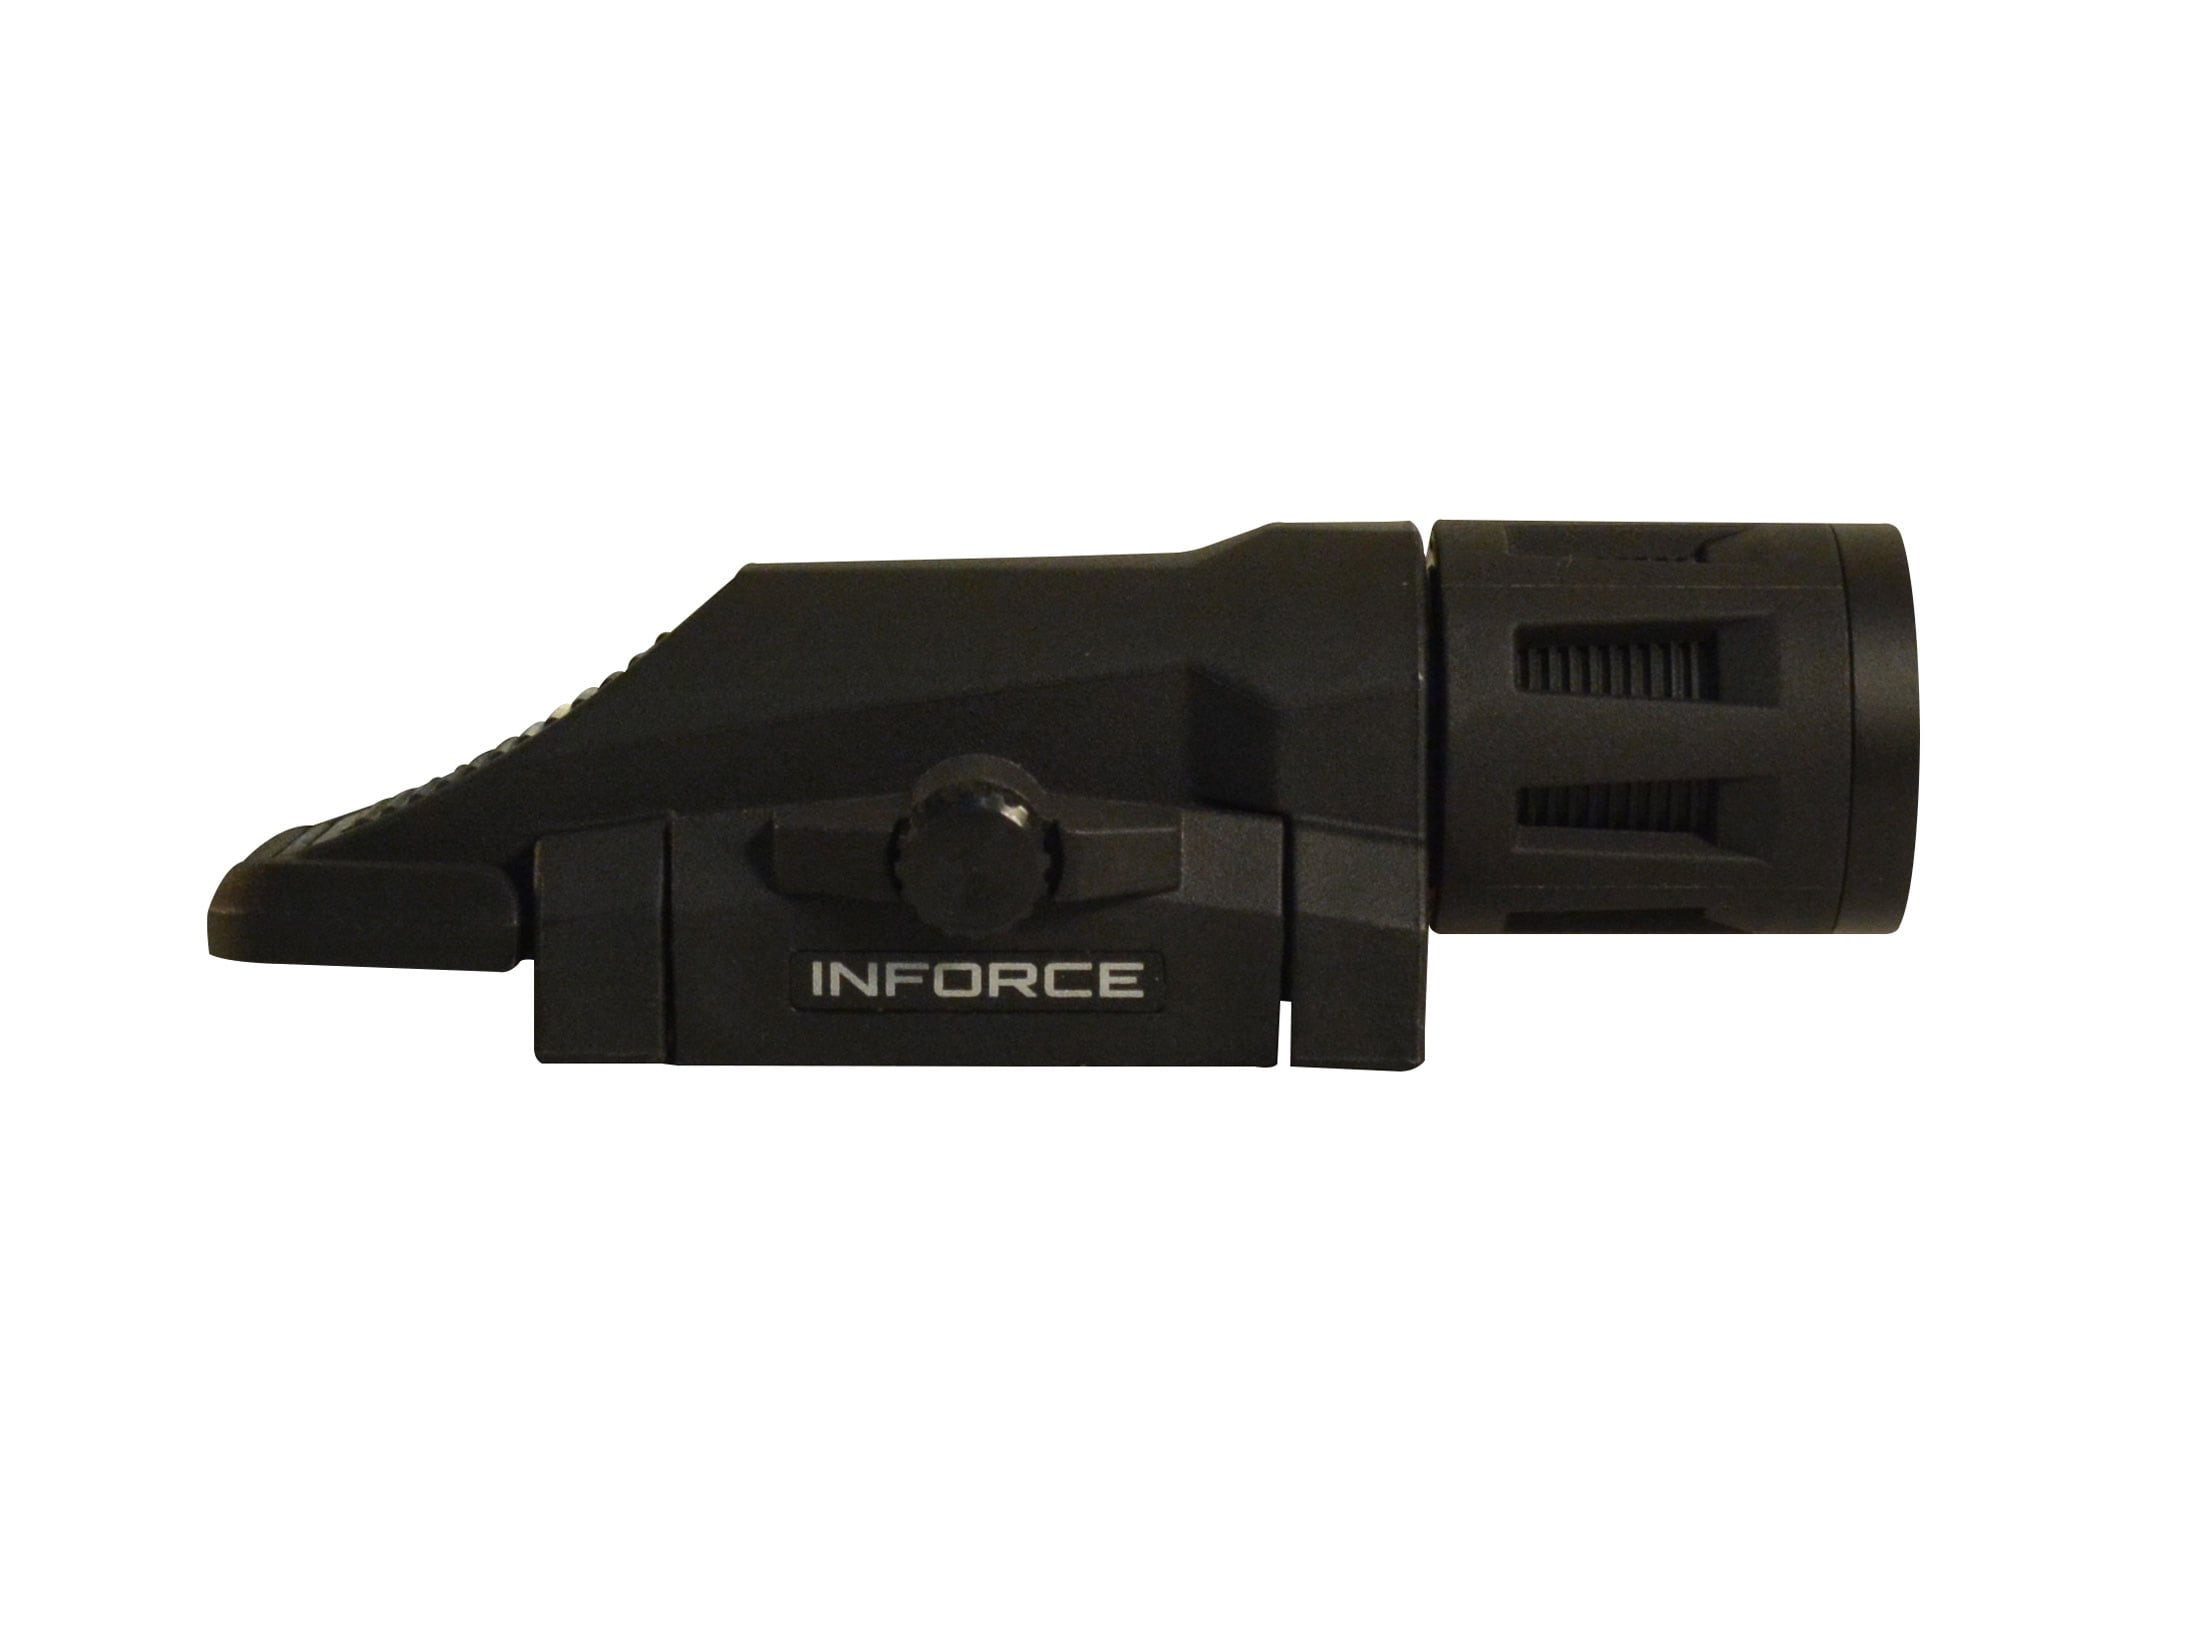 INFORCE WML Gen2 LED Weapon Mounted Tactical Rail Light 400 Lumens for sale online 